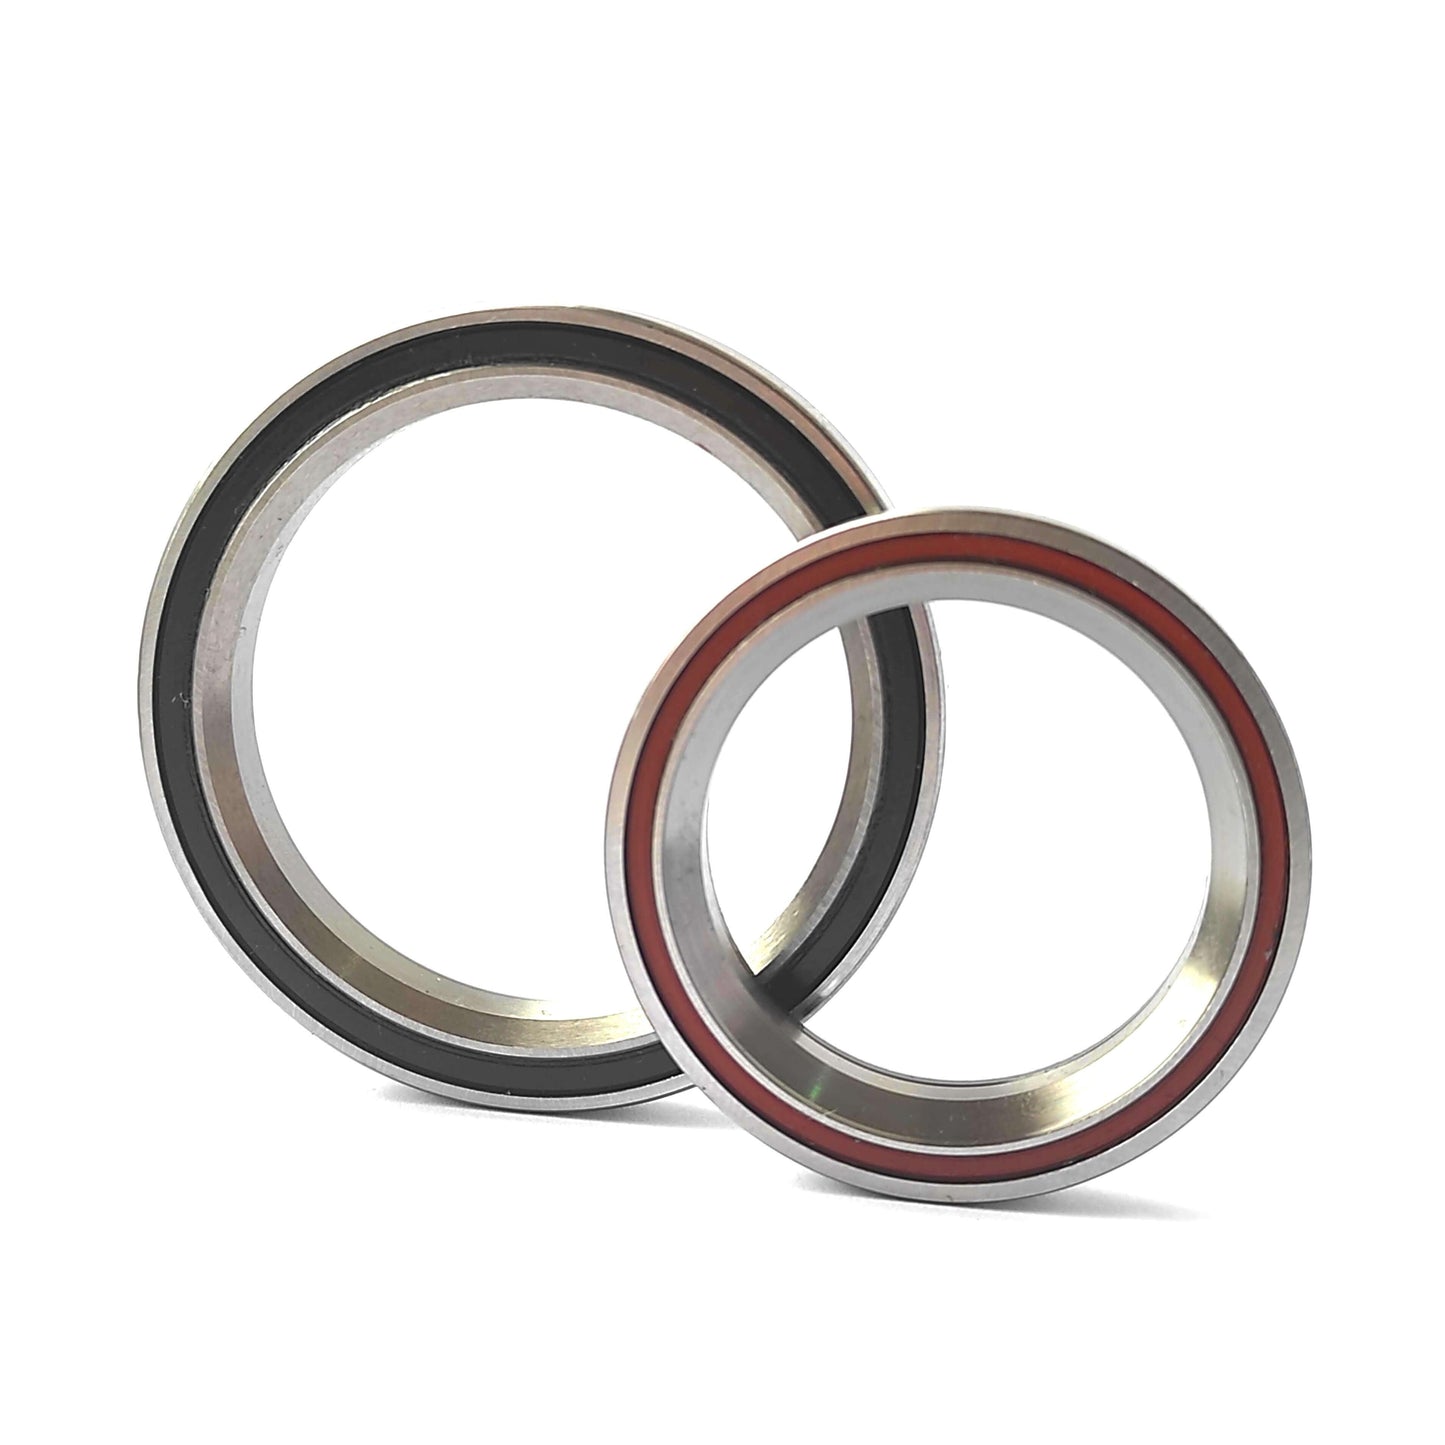 Stumpjumper Headset Bearings - Specialized - Trailvision - Bicycle Bearing Suppliers